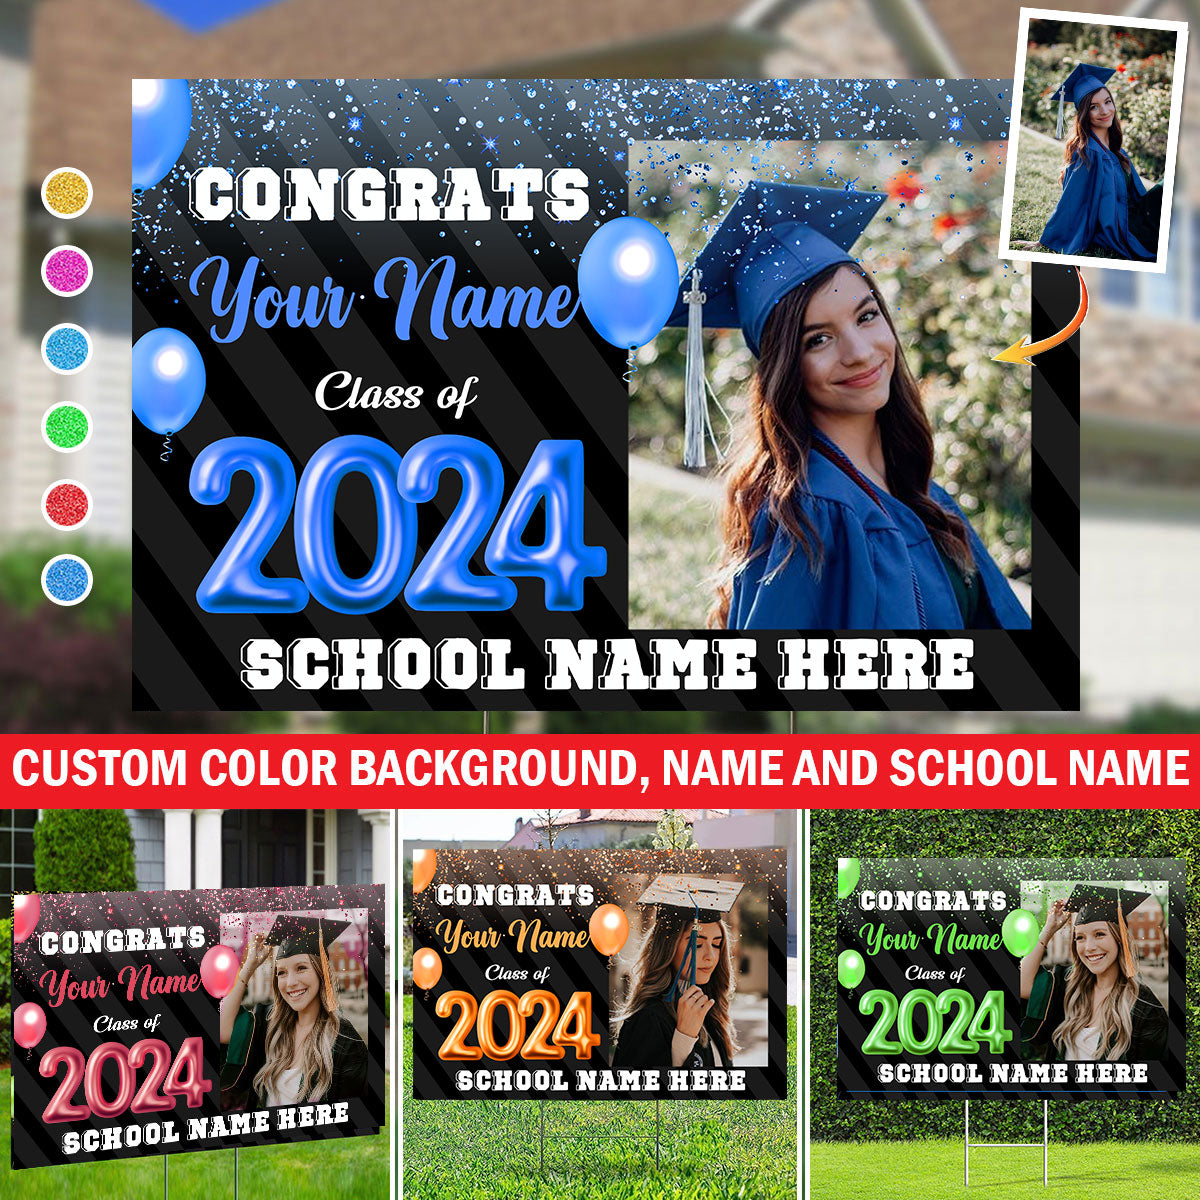 Congrats Class Of 2024, Custom Background, Quote, Photo And Texts - Personalized Lawn Sign, Yard Sign, Graduation Gift, College Graduation